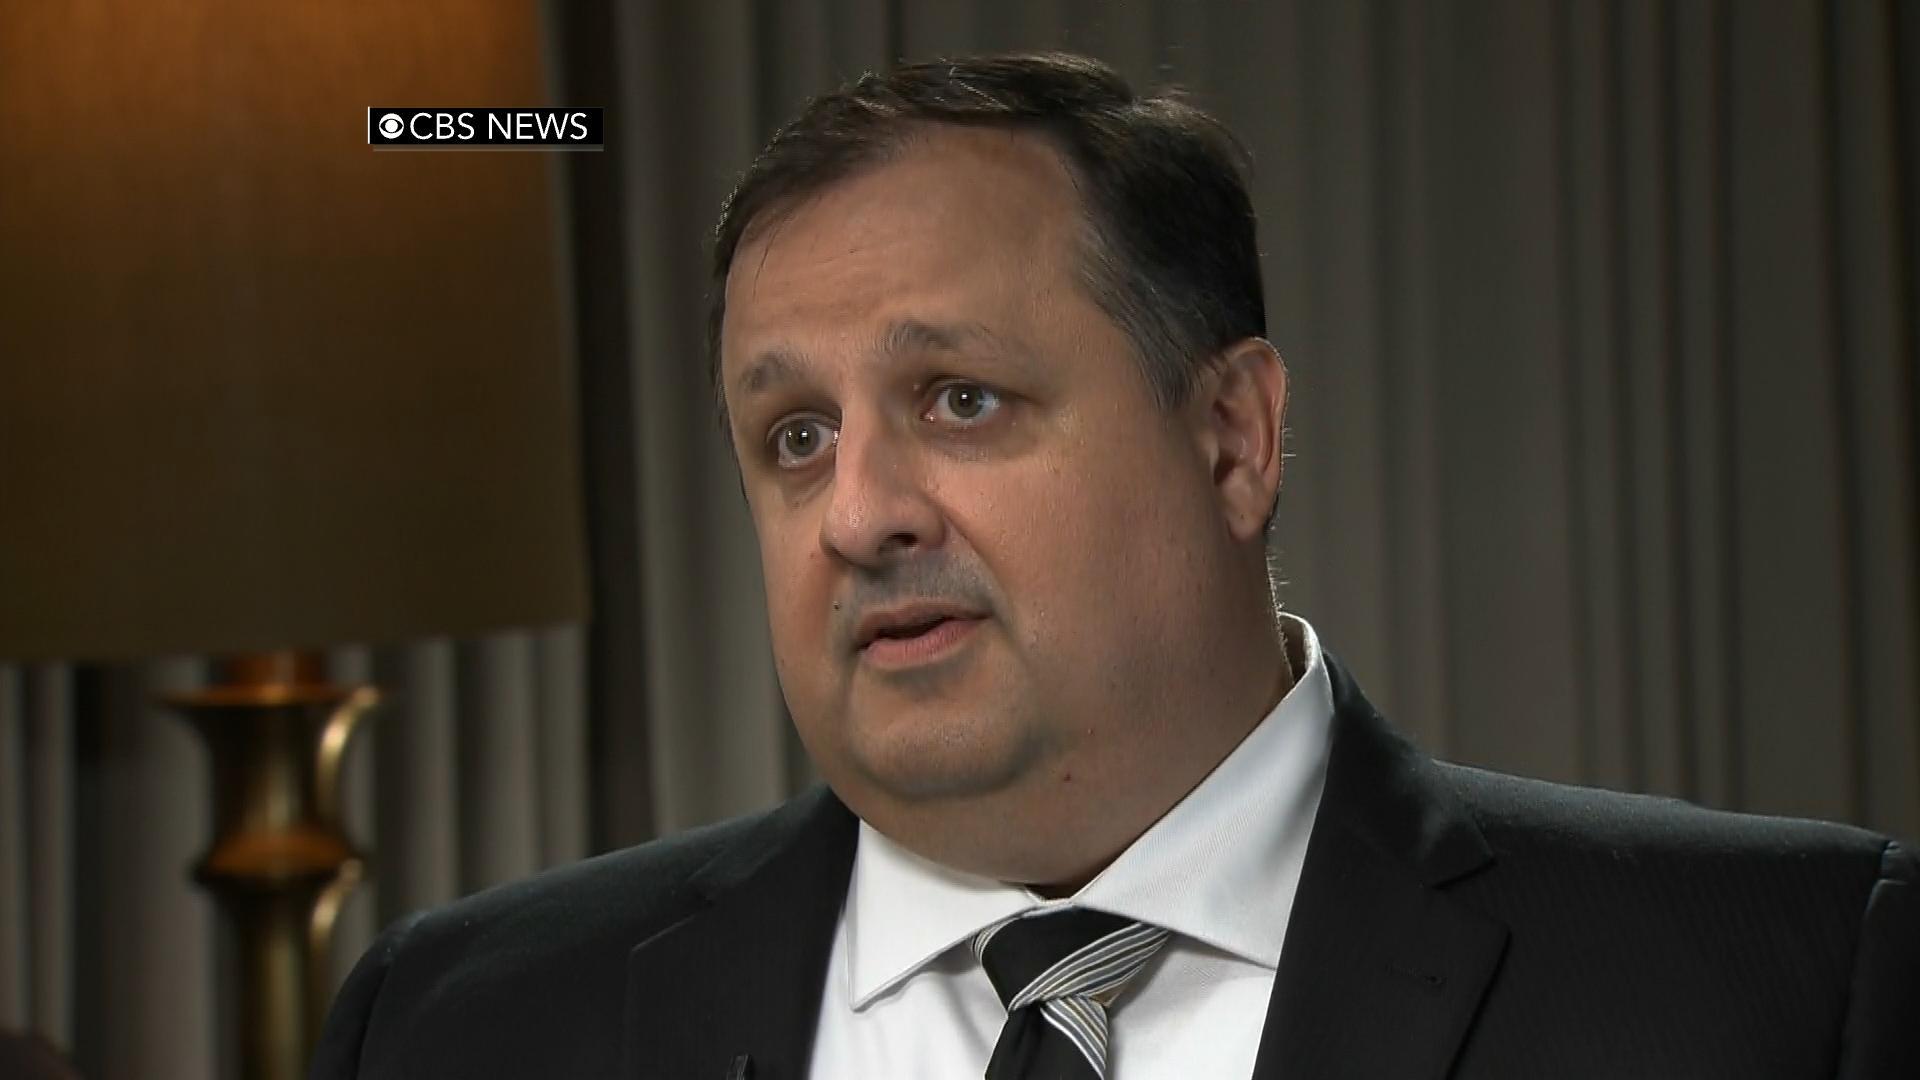 Walter Shaub says America should have right to know motivations of its leaders - CBS News1920 x 1080